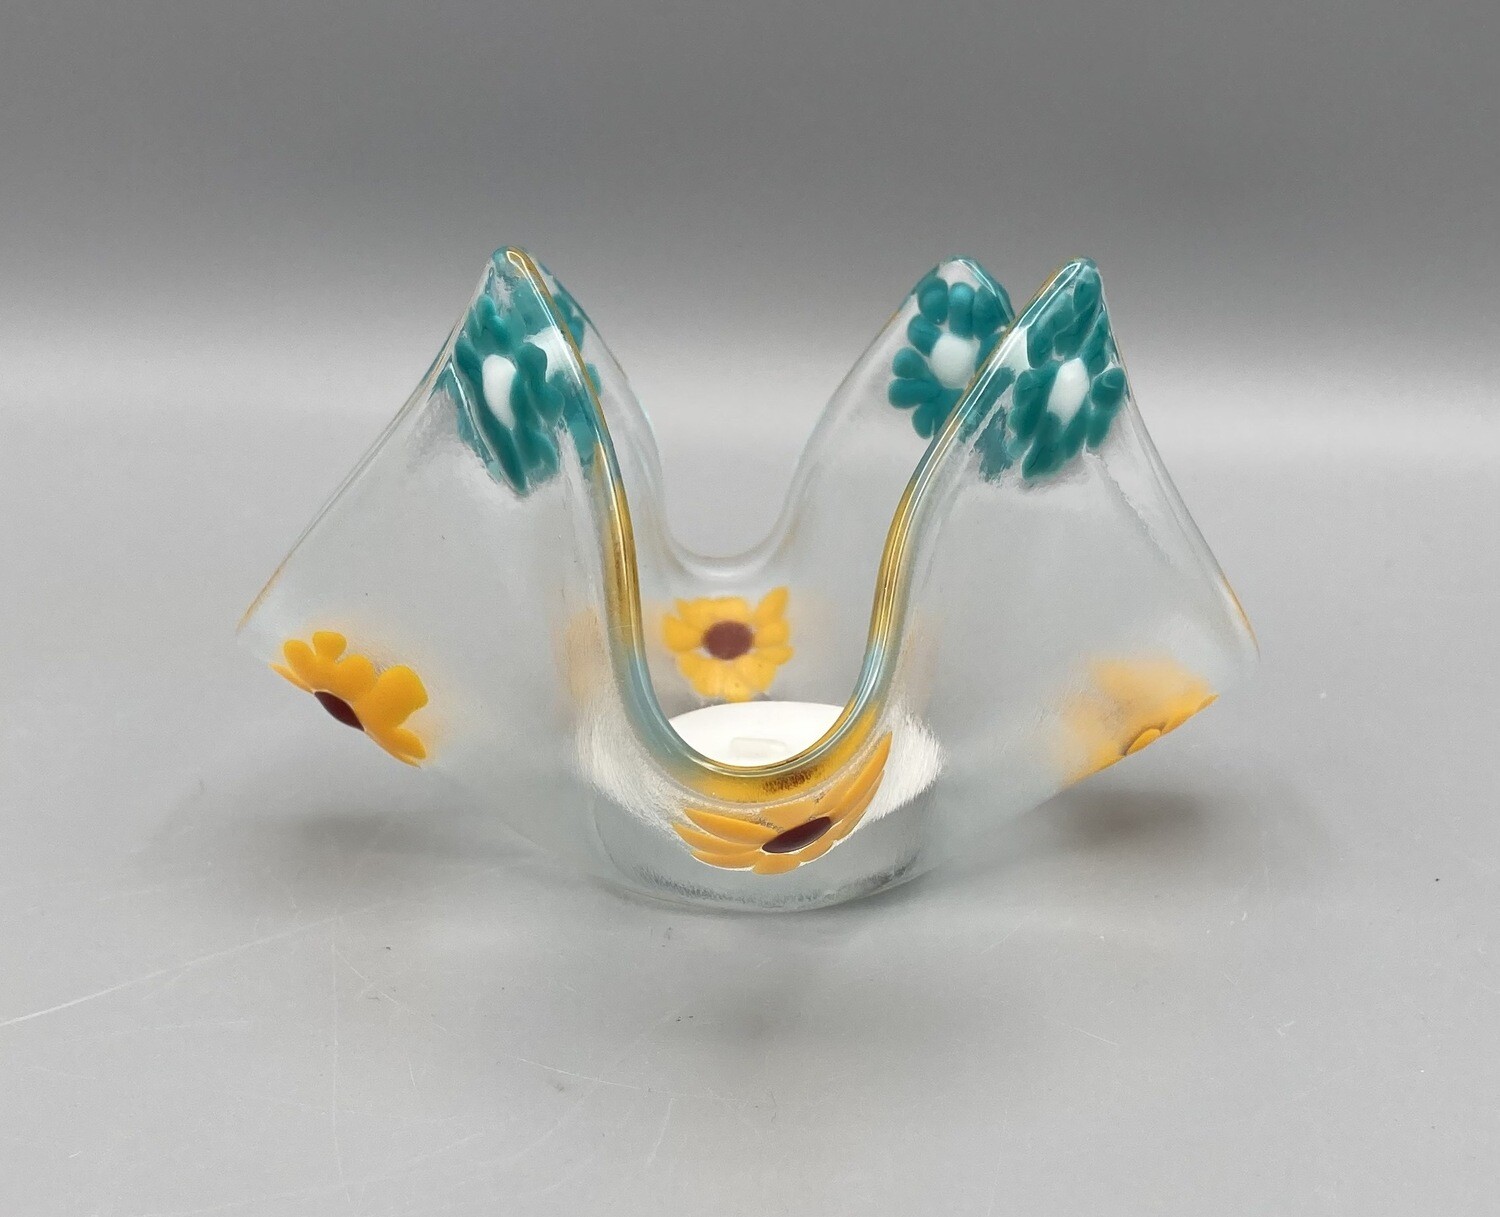 Jocy Fisher Teal and Yellow Flower Votive